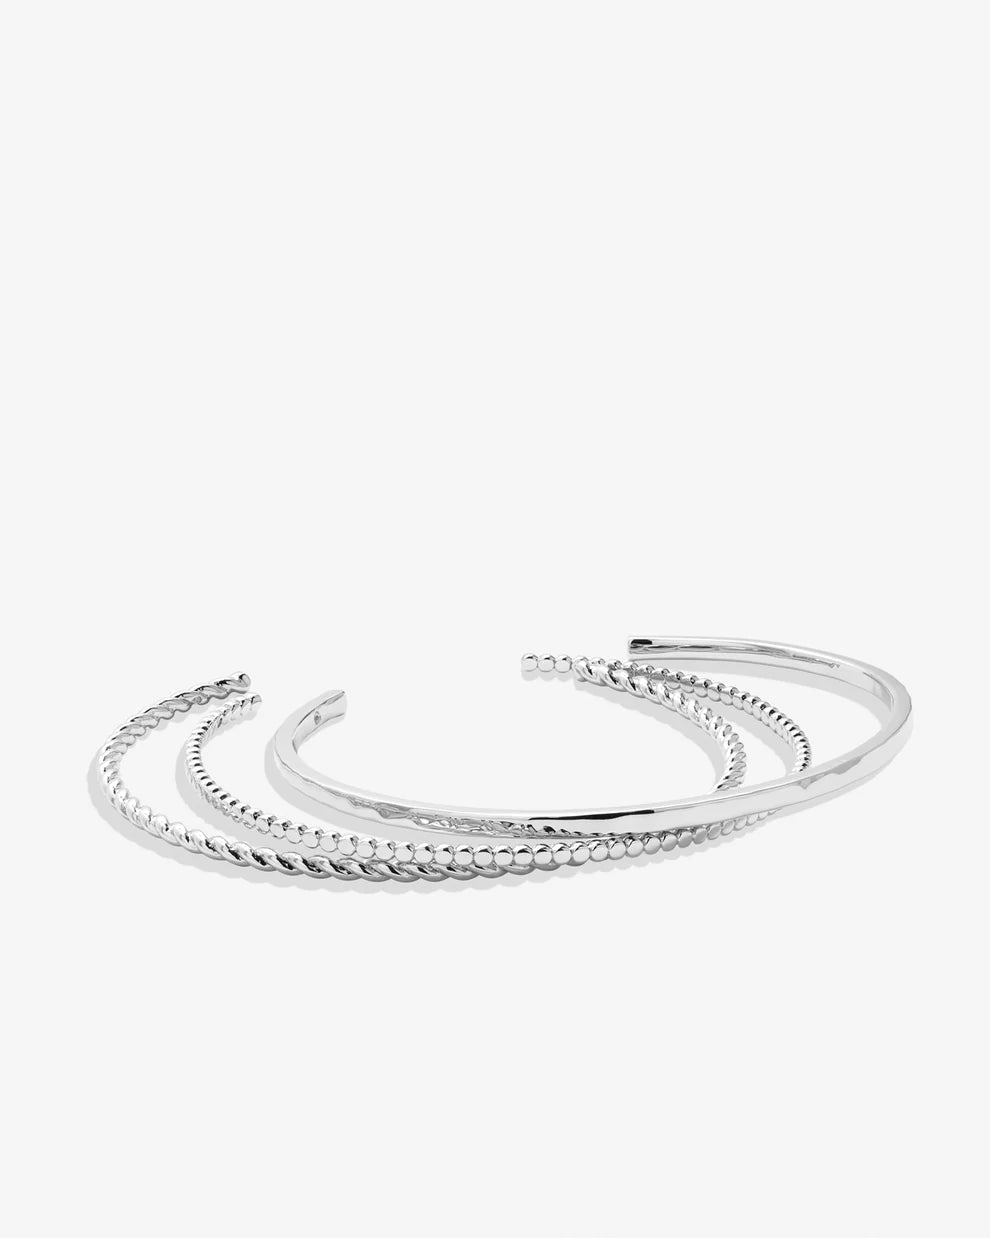 LAYERS OF YOU BRACELET STACK